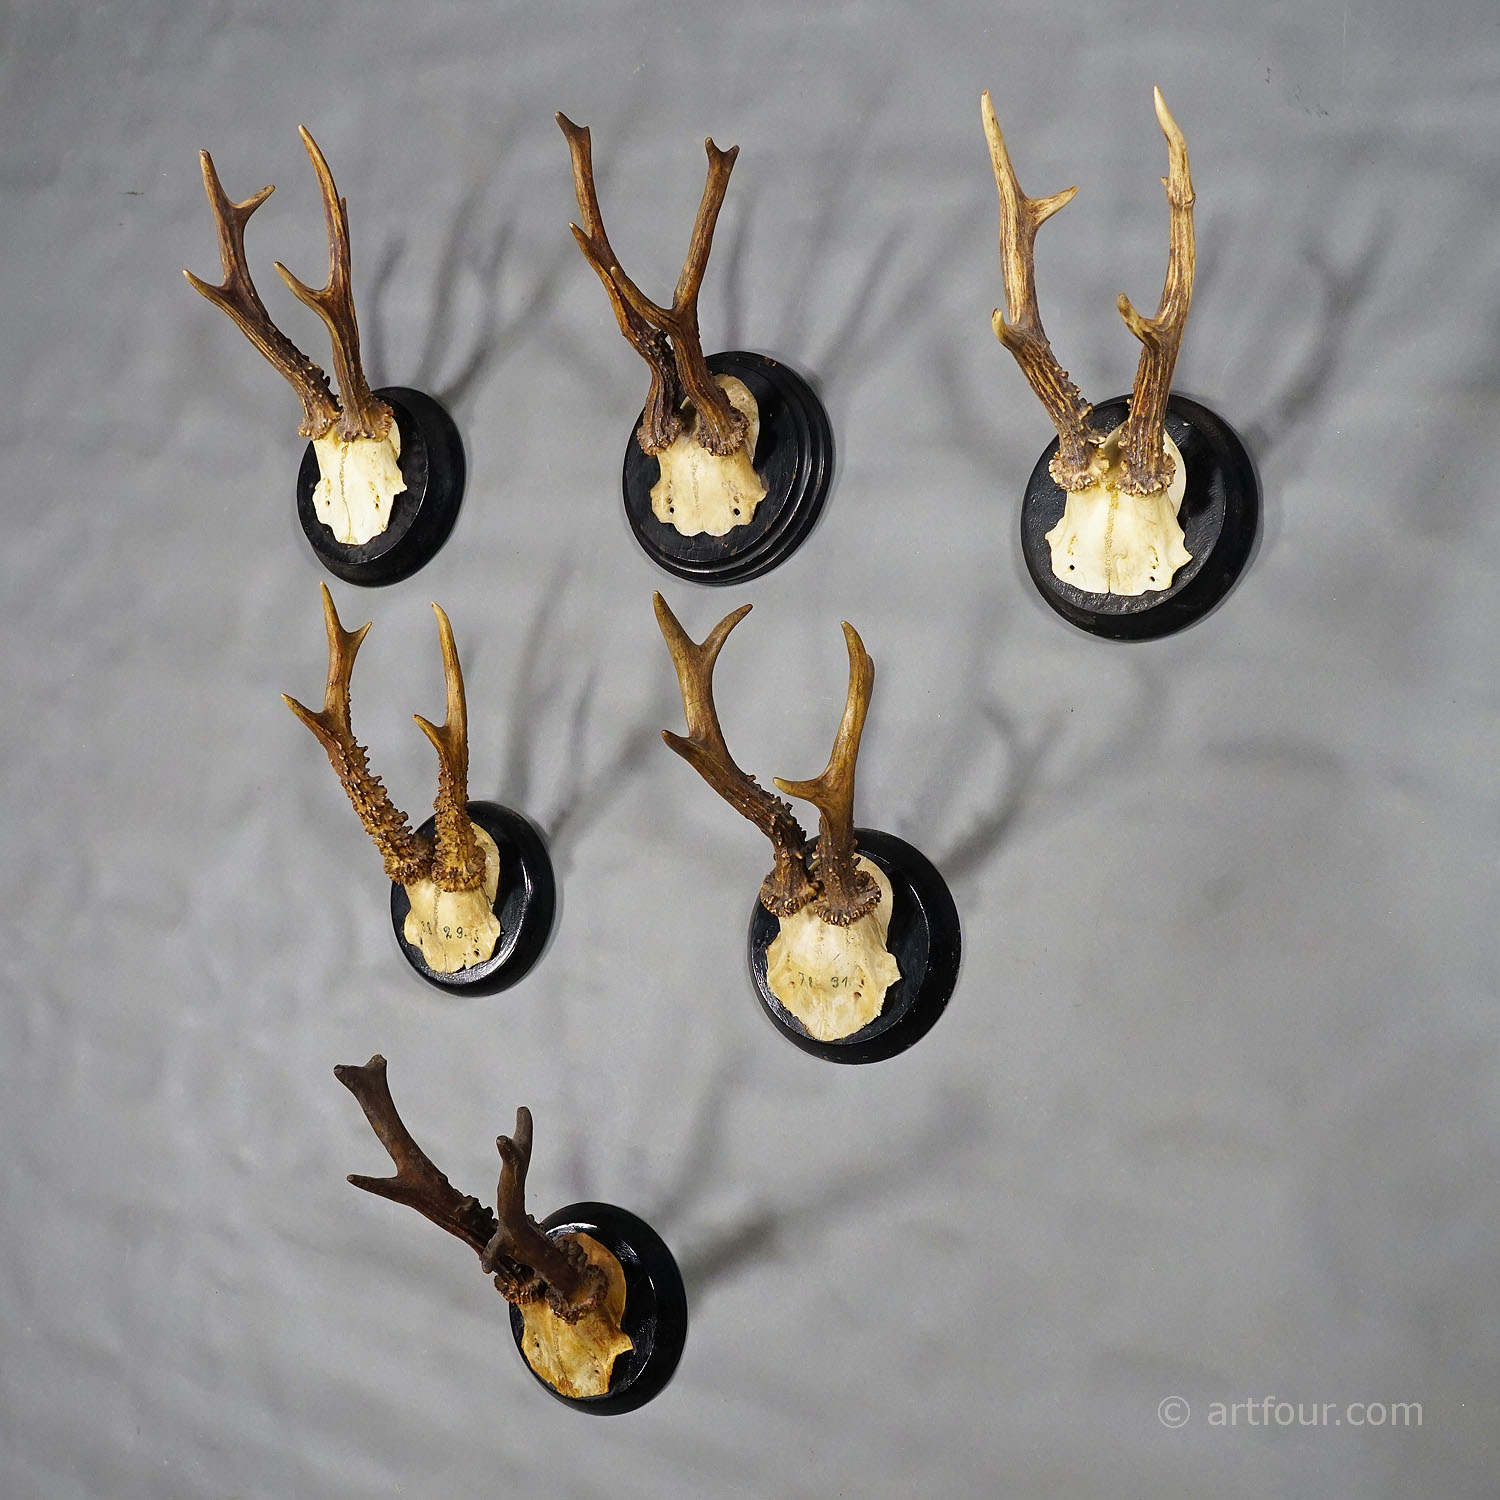 Six Antique Roe Deer Trophies on Wooden Plaques Germany ca. 1900